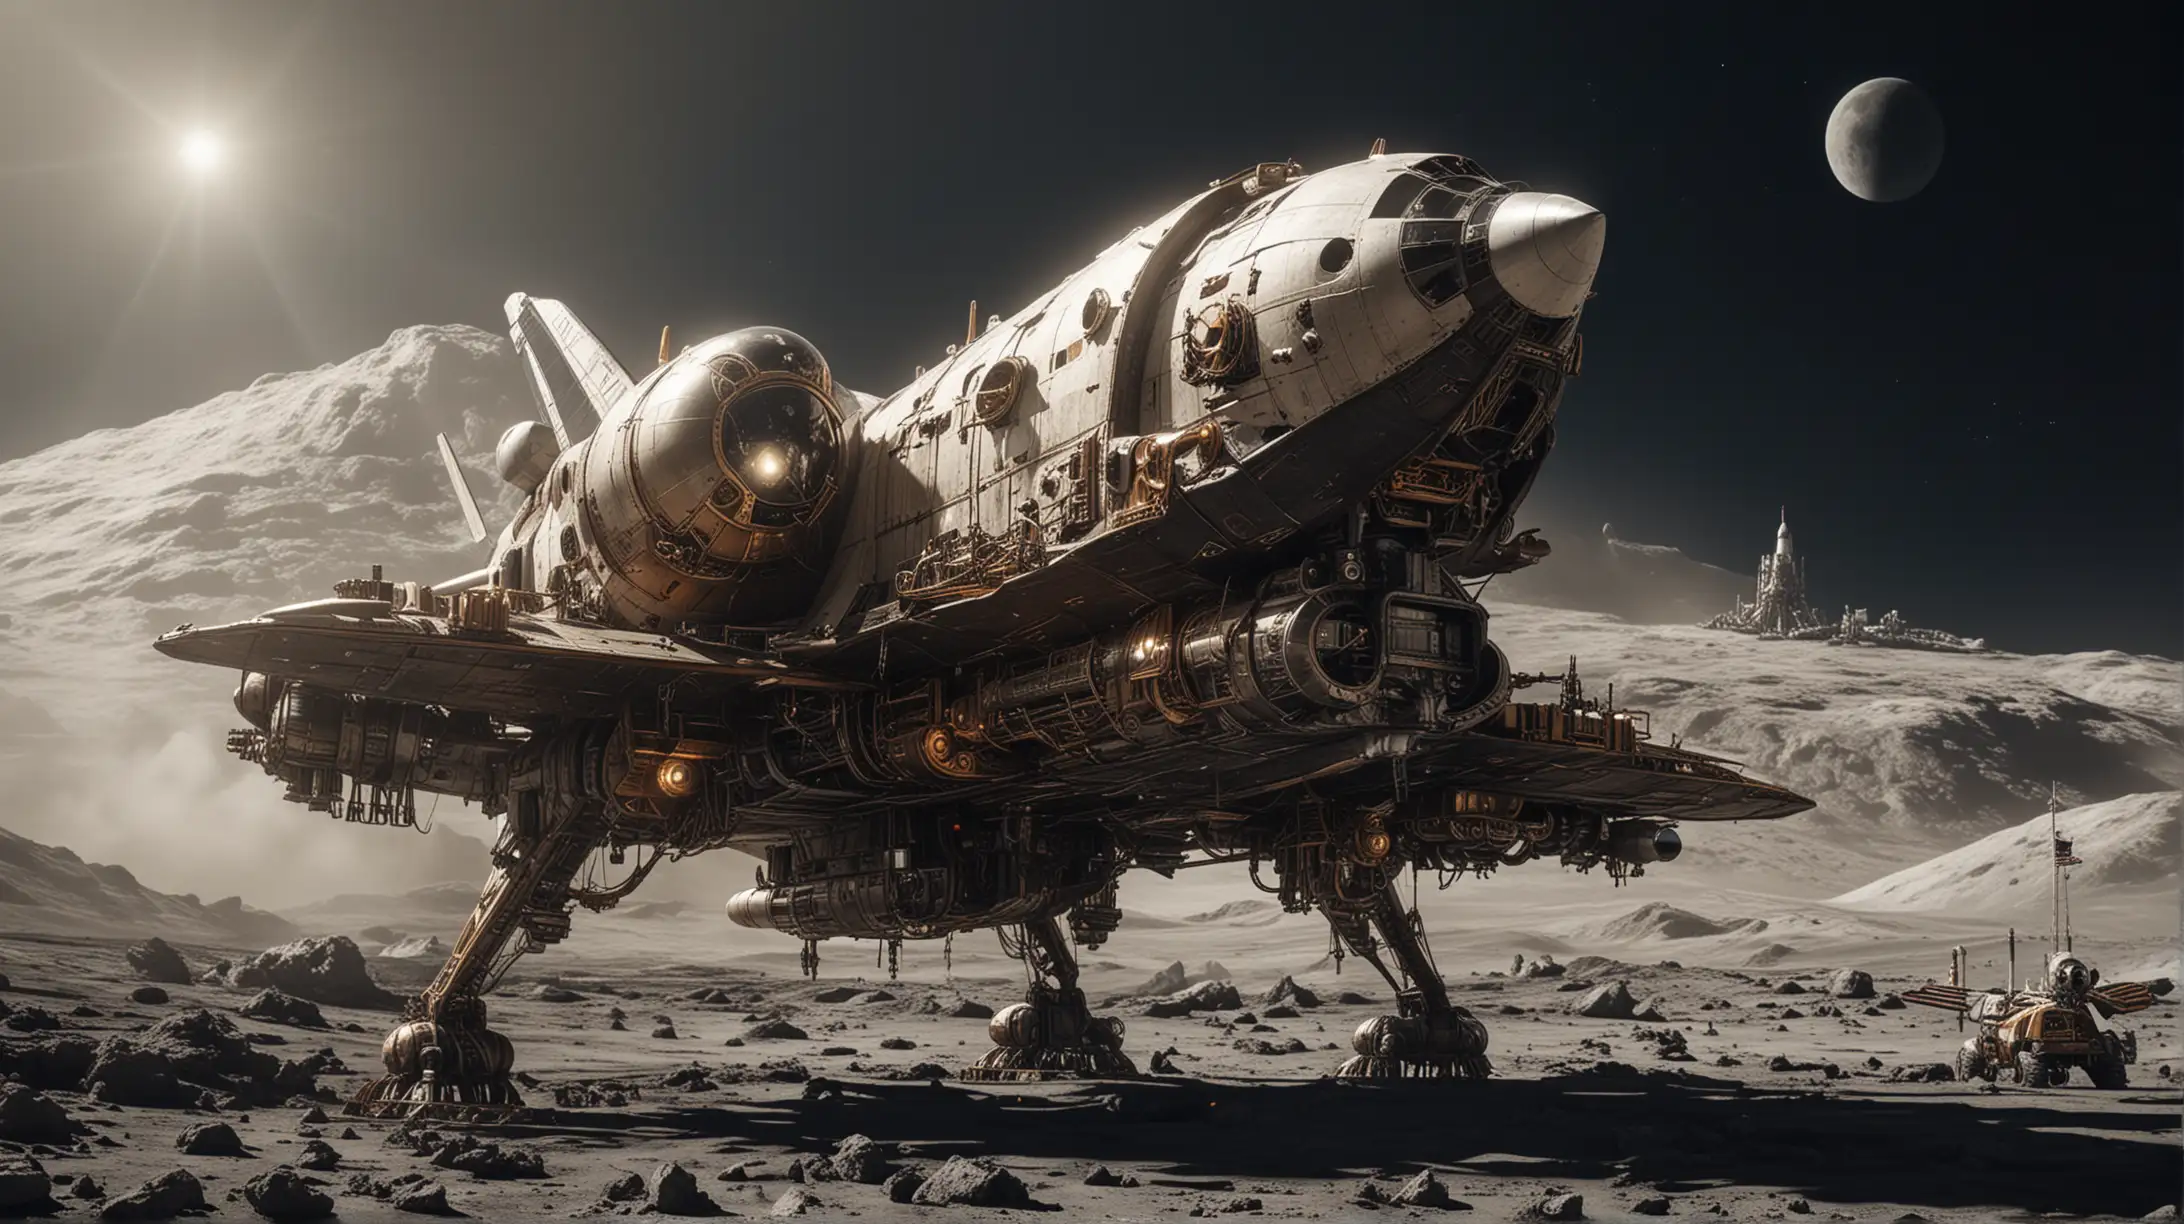 Steampunk Space Shuttle Landing on the Moons Surface